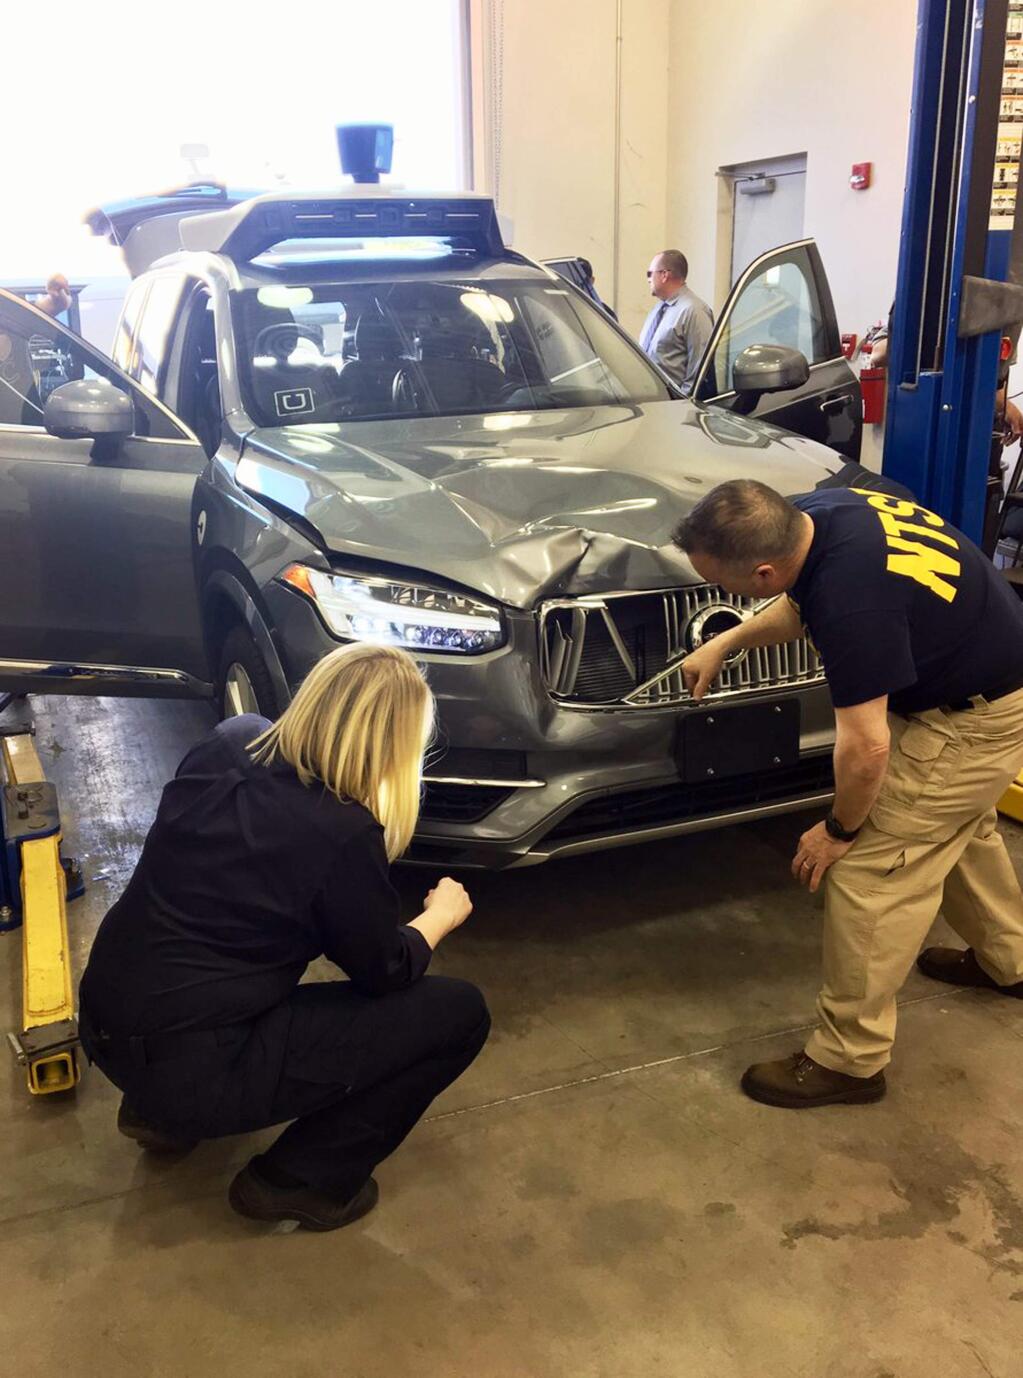 FILE - In this March 20, 2018 file photo provided by the National Transportation Safety Board, investigators examine a driverless Uber SUV that fatally struck a woman in Tempe, Ariz. An Arizona police report says the human backup driver the Uber autonomous SUV was streaming a television show on Hulu just before the vehicle struck and killed a pedestrian in March. The Arizona Republic reported that the driver was watching “The Voice,” a television musical talent show. The newspaper received the more than 300-page report from Tempe police on Thursday, June 21. (National Transportation Safety Board via AP)